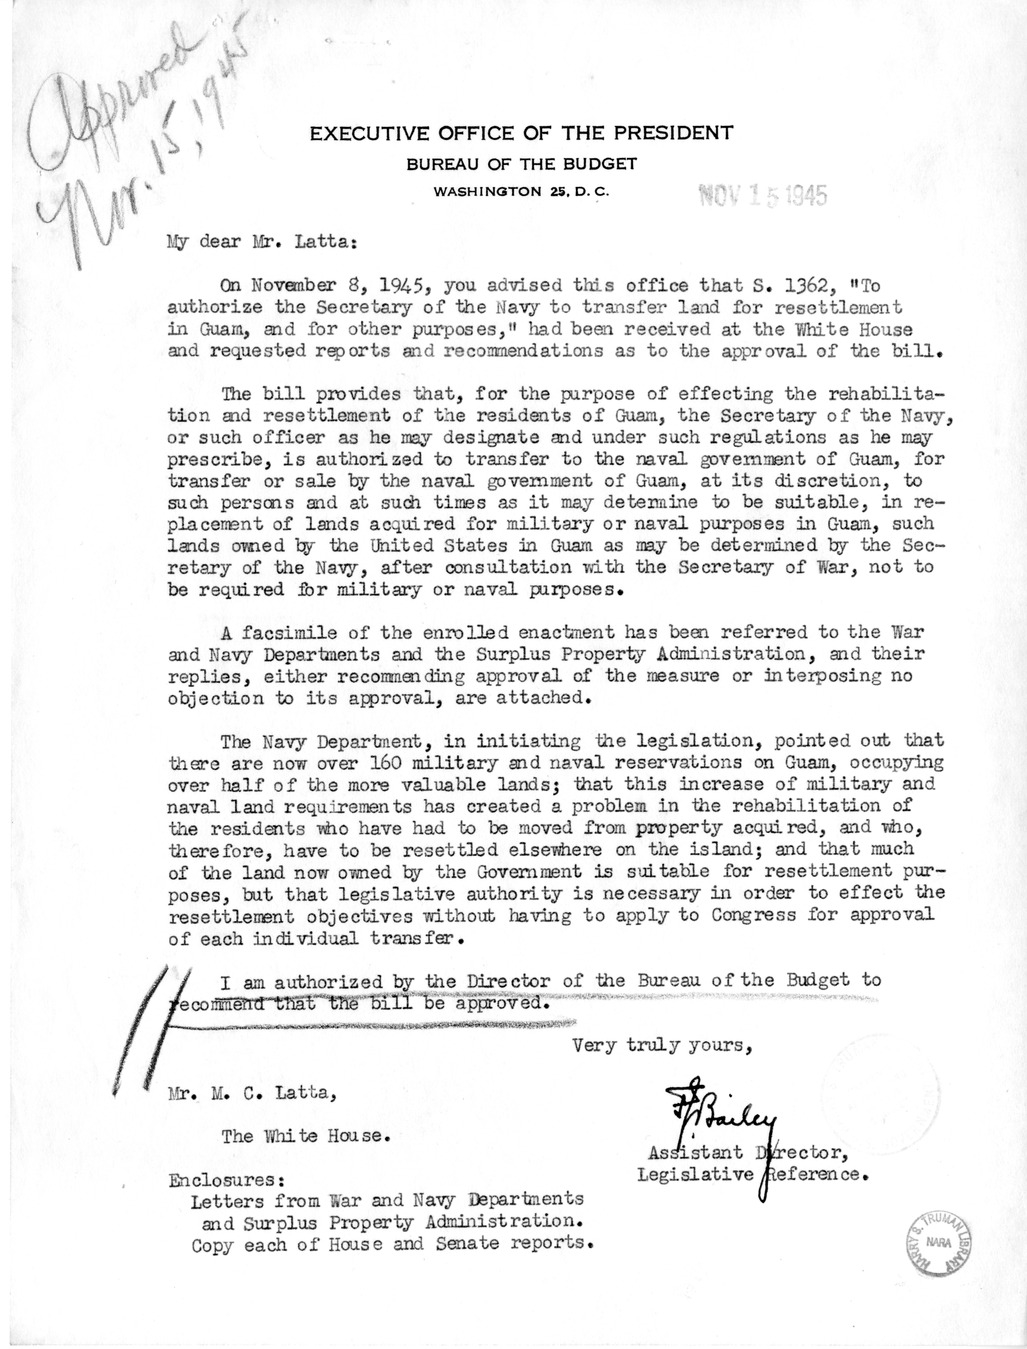 Memorandum from Frederick J. Bailey to M. C. Latta, S. 1362, To Authorize the Secretary of the Navy to Transfer Land for Resettlement in Guam, with Attachments